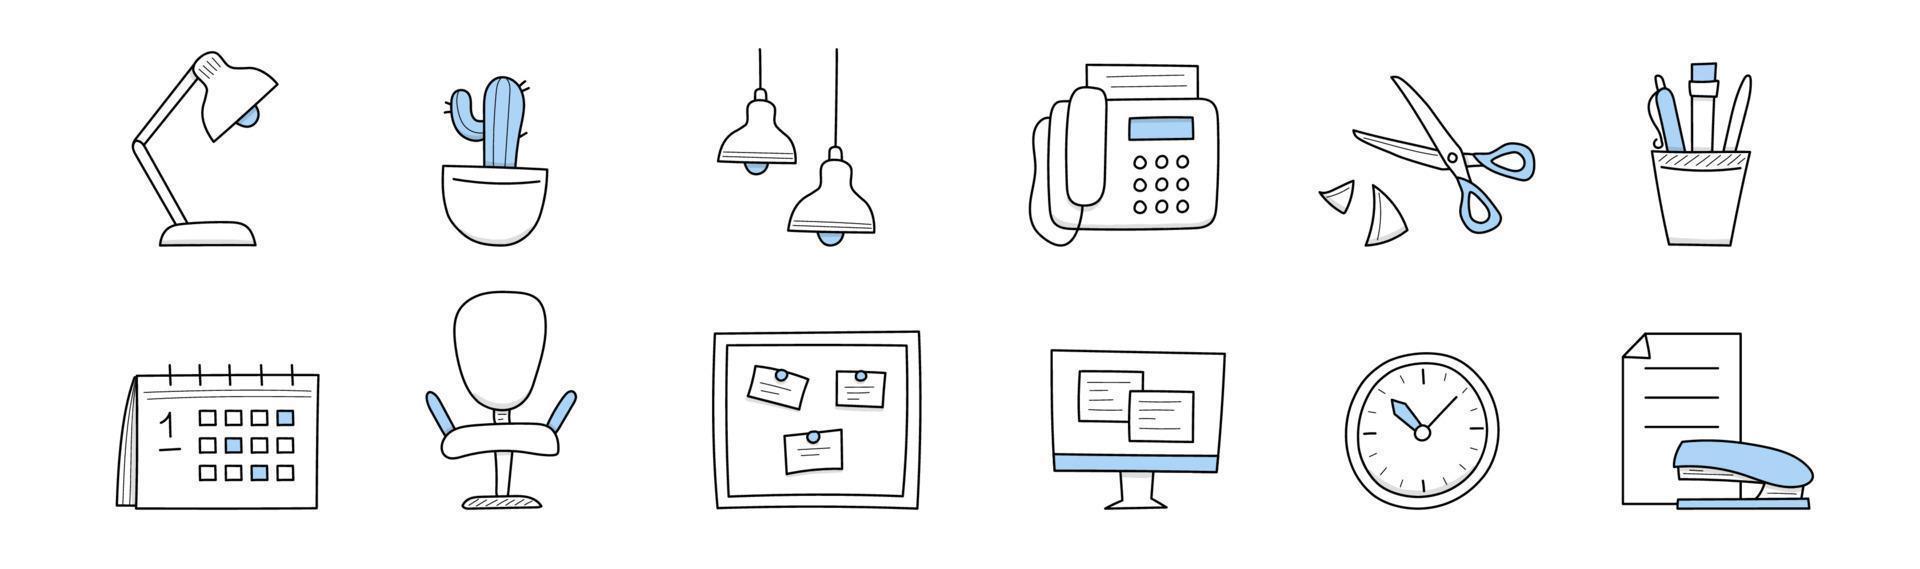 Office supplies or stuff doodle icons isolated set vector